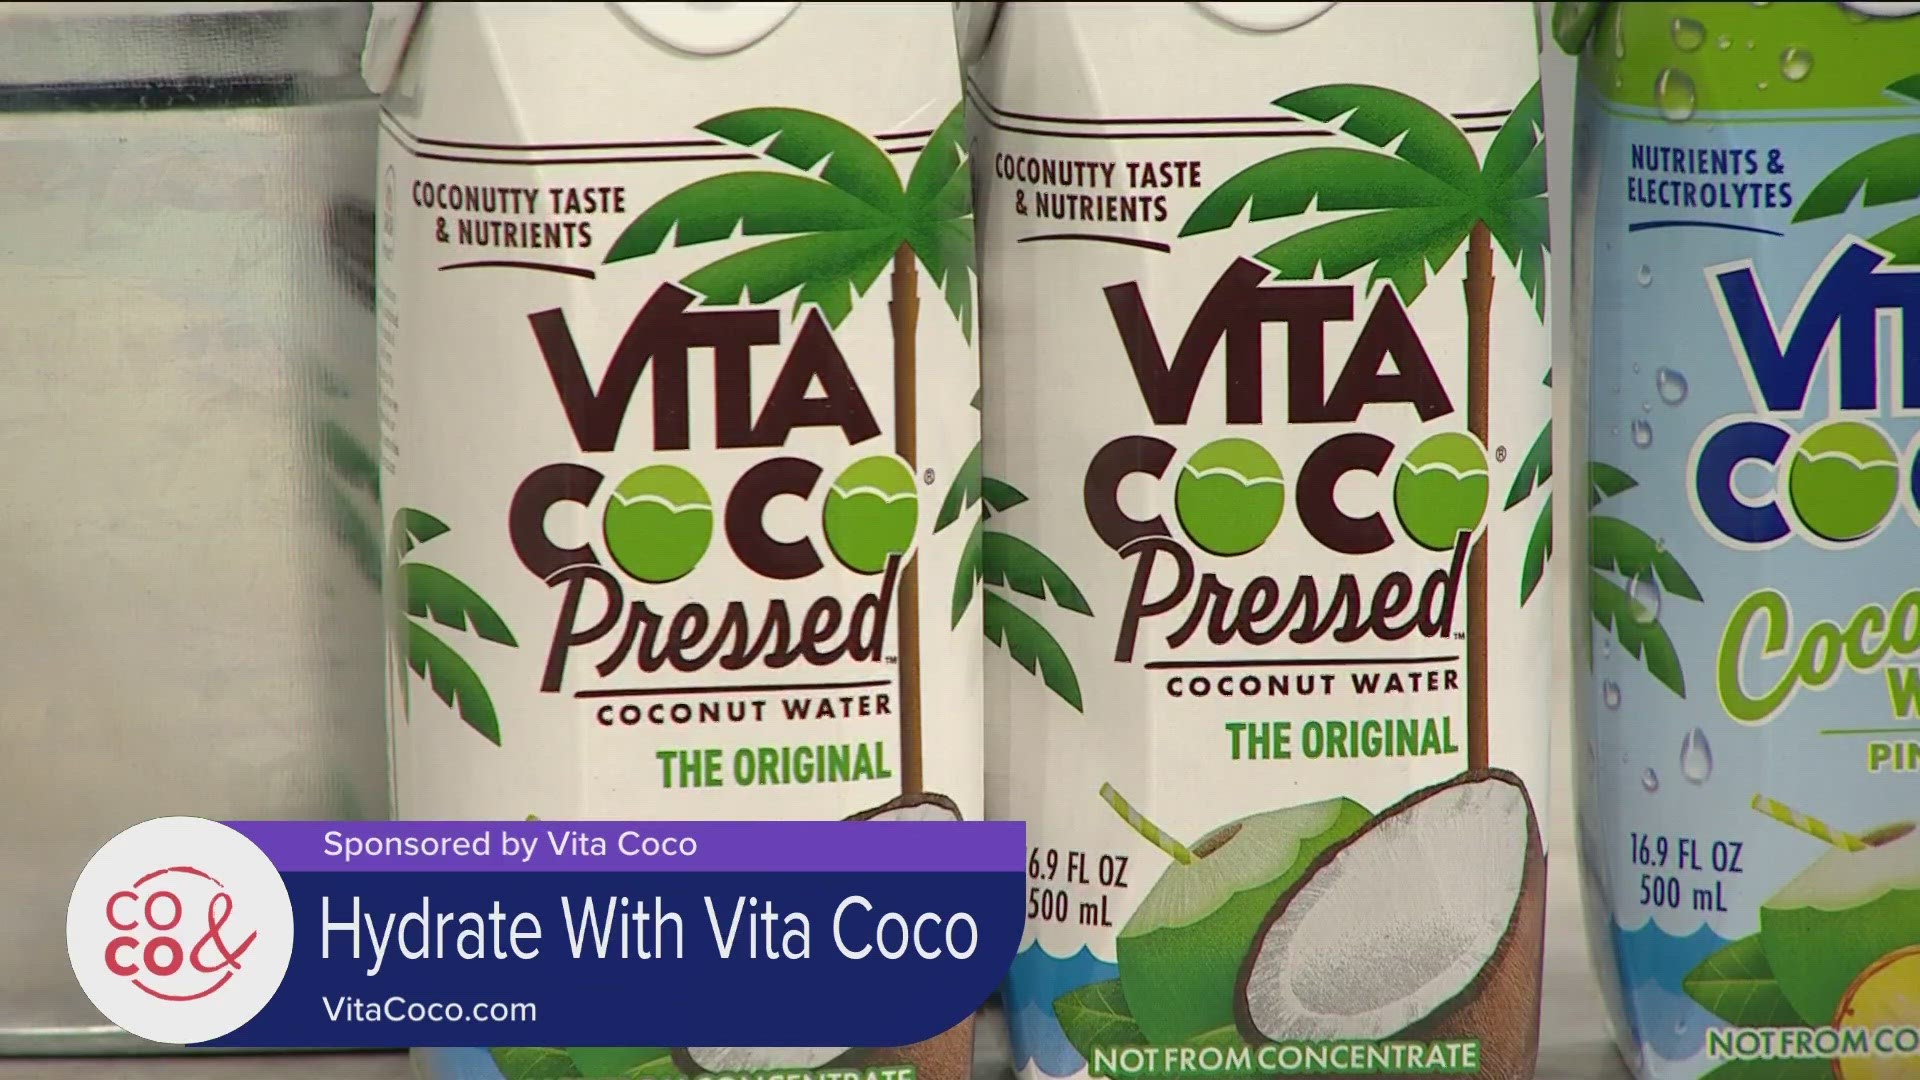 Visit VitaCoco.com to learn more and find the right refreshing drink for you! Find Vita Coco at your local King Soopers, the home of Optimum Wellness. **PAID CONTENT